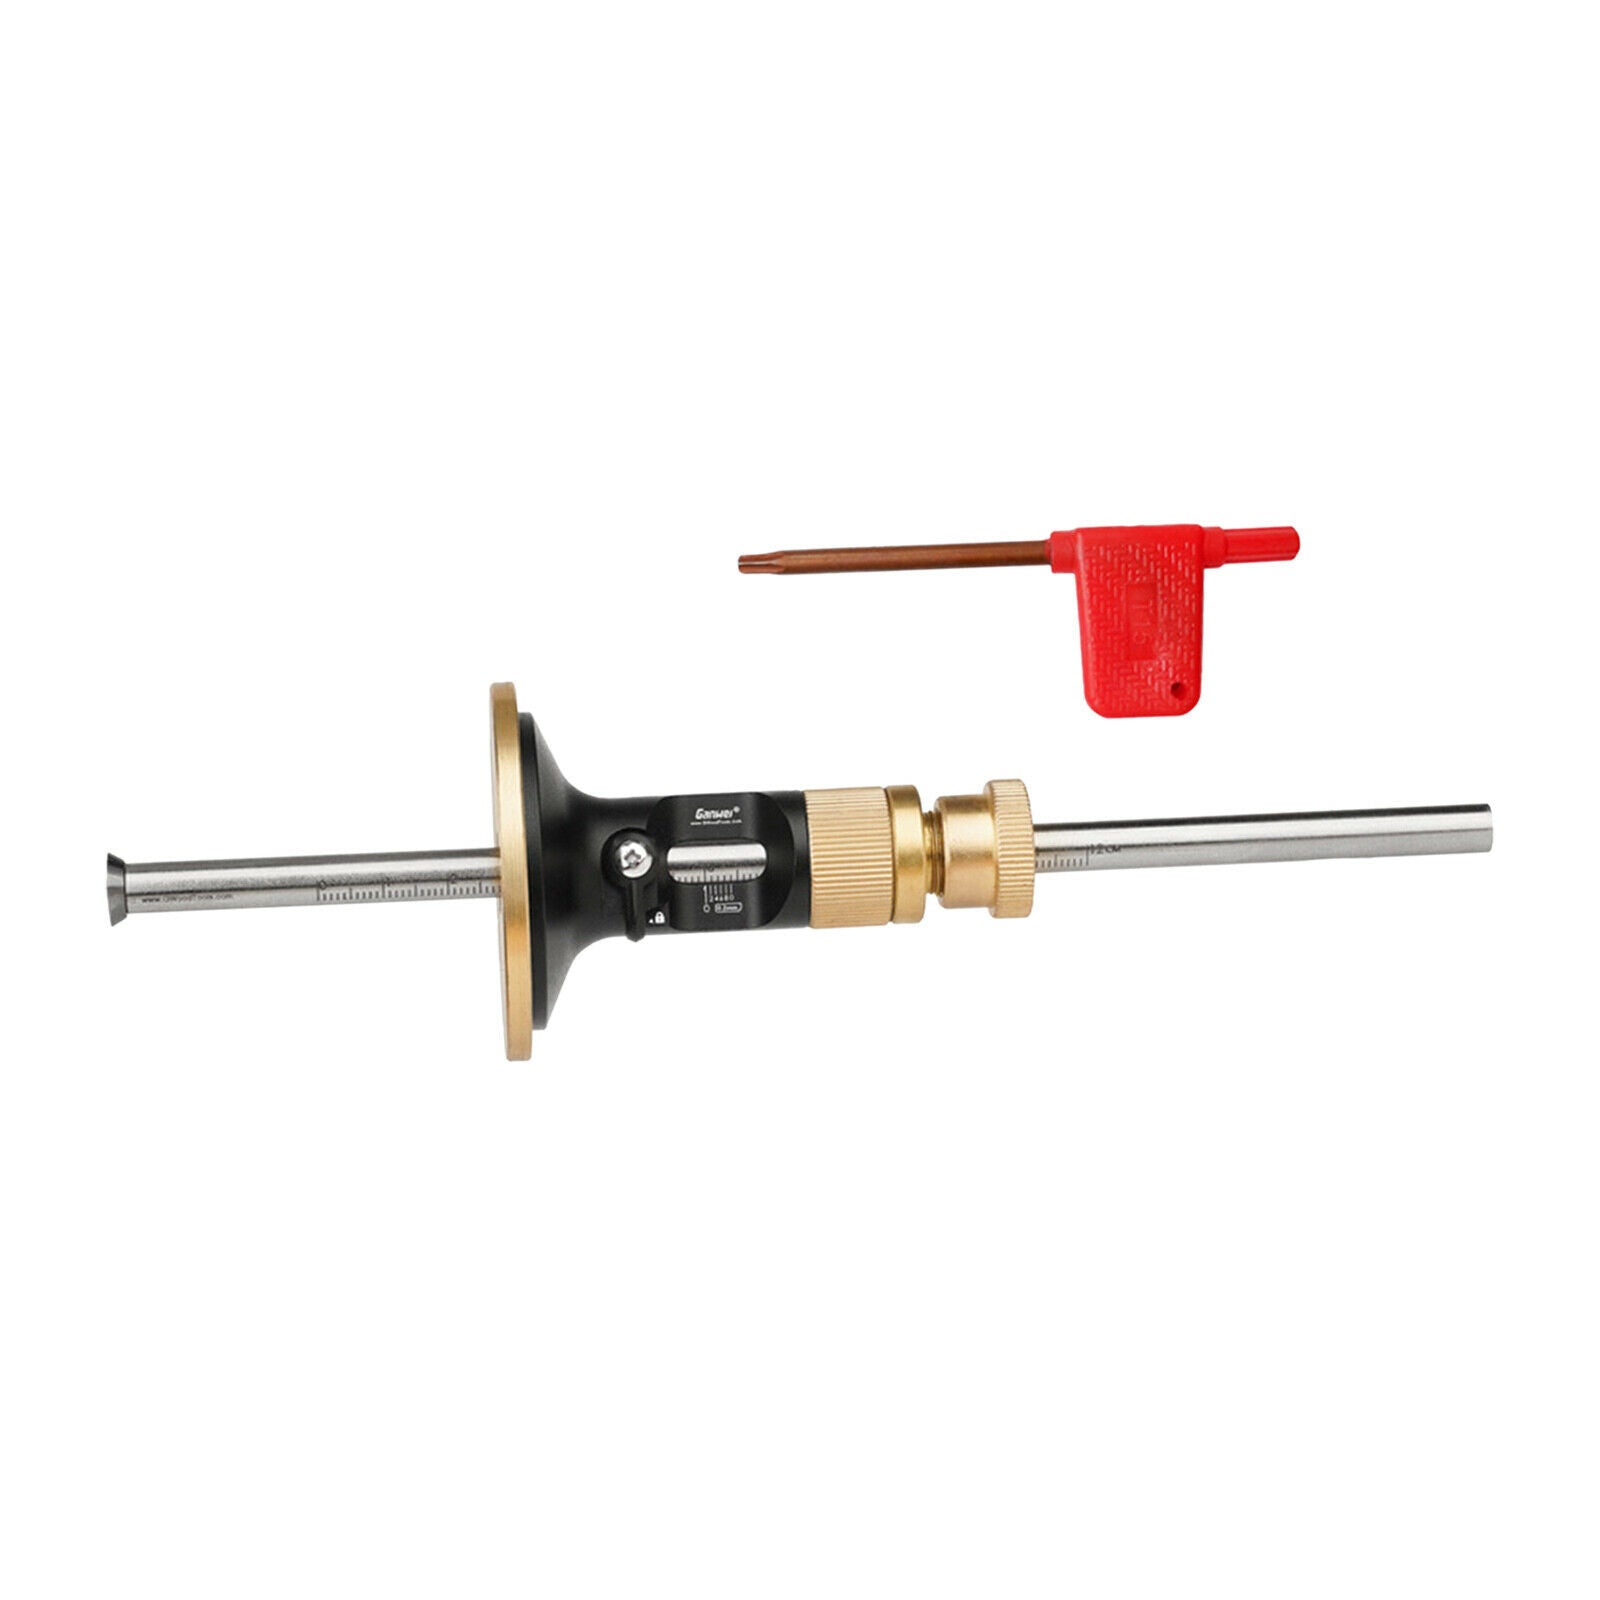 2mm Scale Wheel Marking Gauge Micro Adjuster High precision for Woodworking